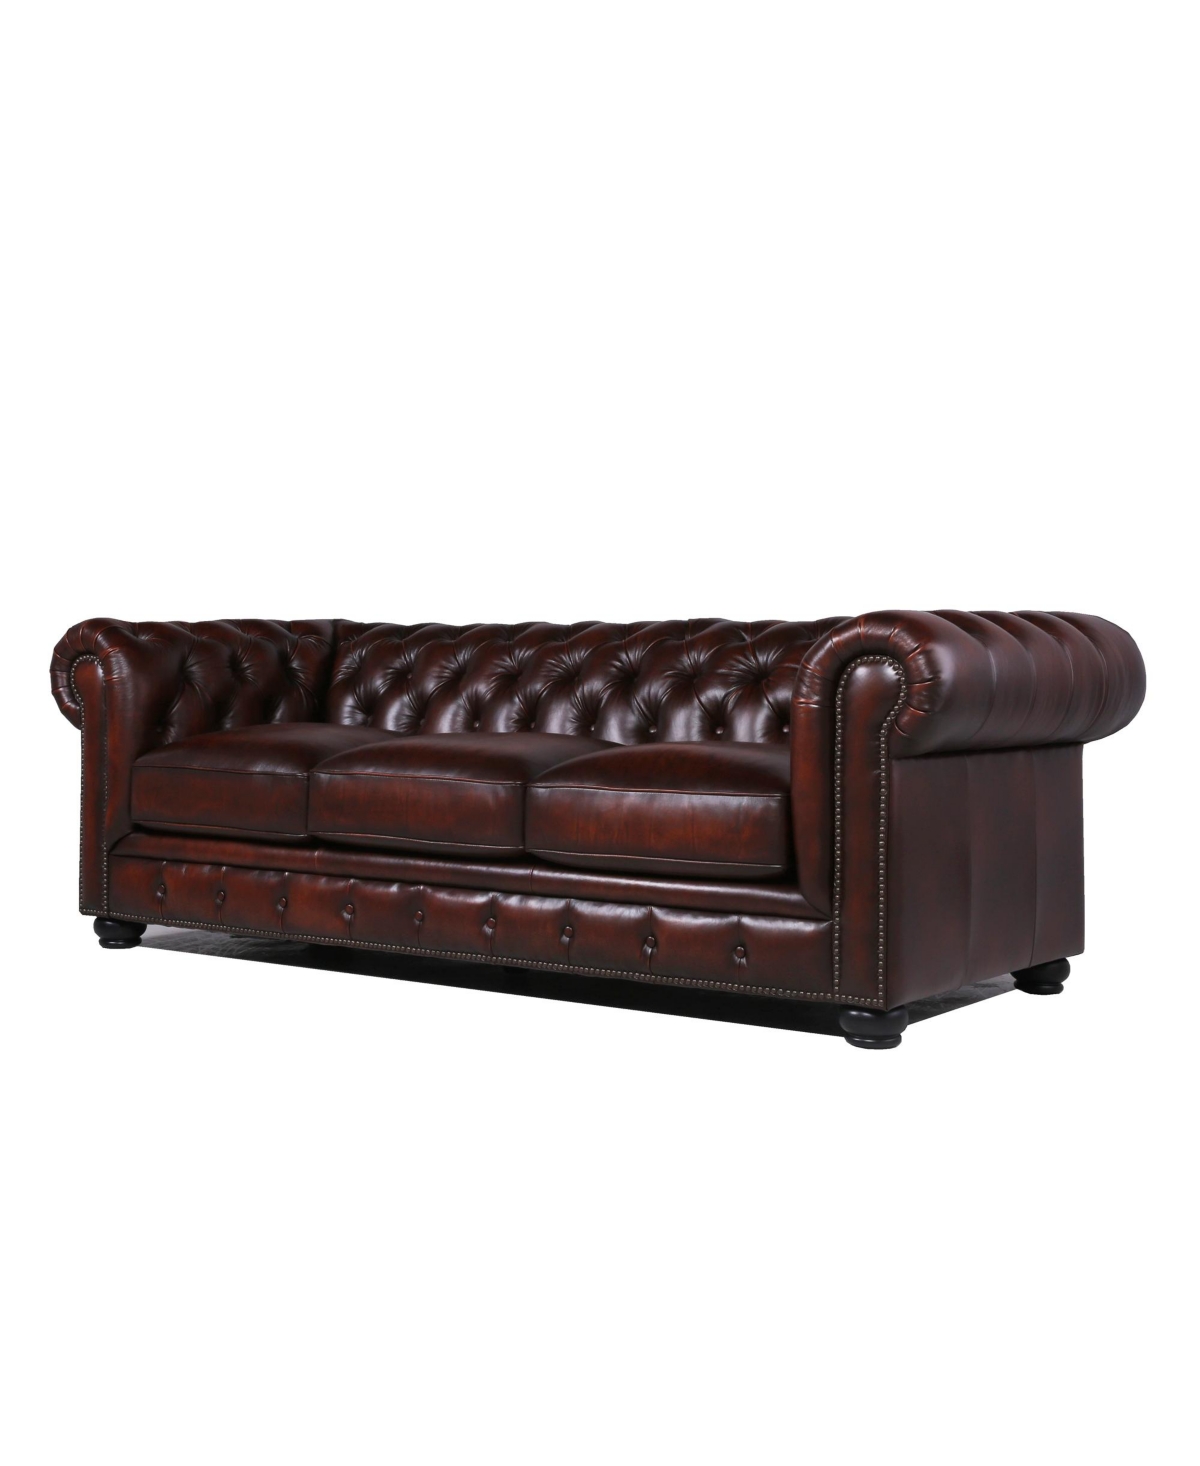 Nice Link Alexandon Leather Chesterfield Tufted Sofa With Roll Arm In Antique Tobacco Brown